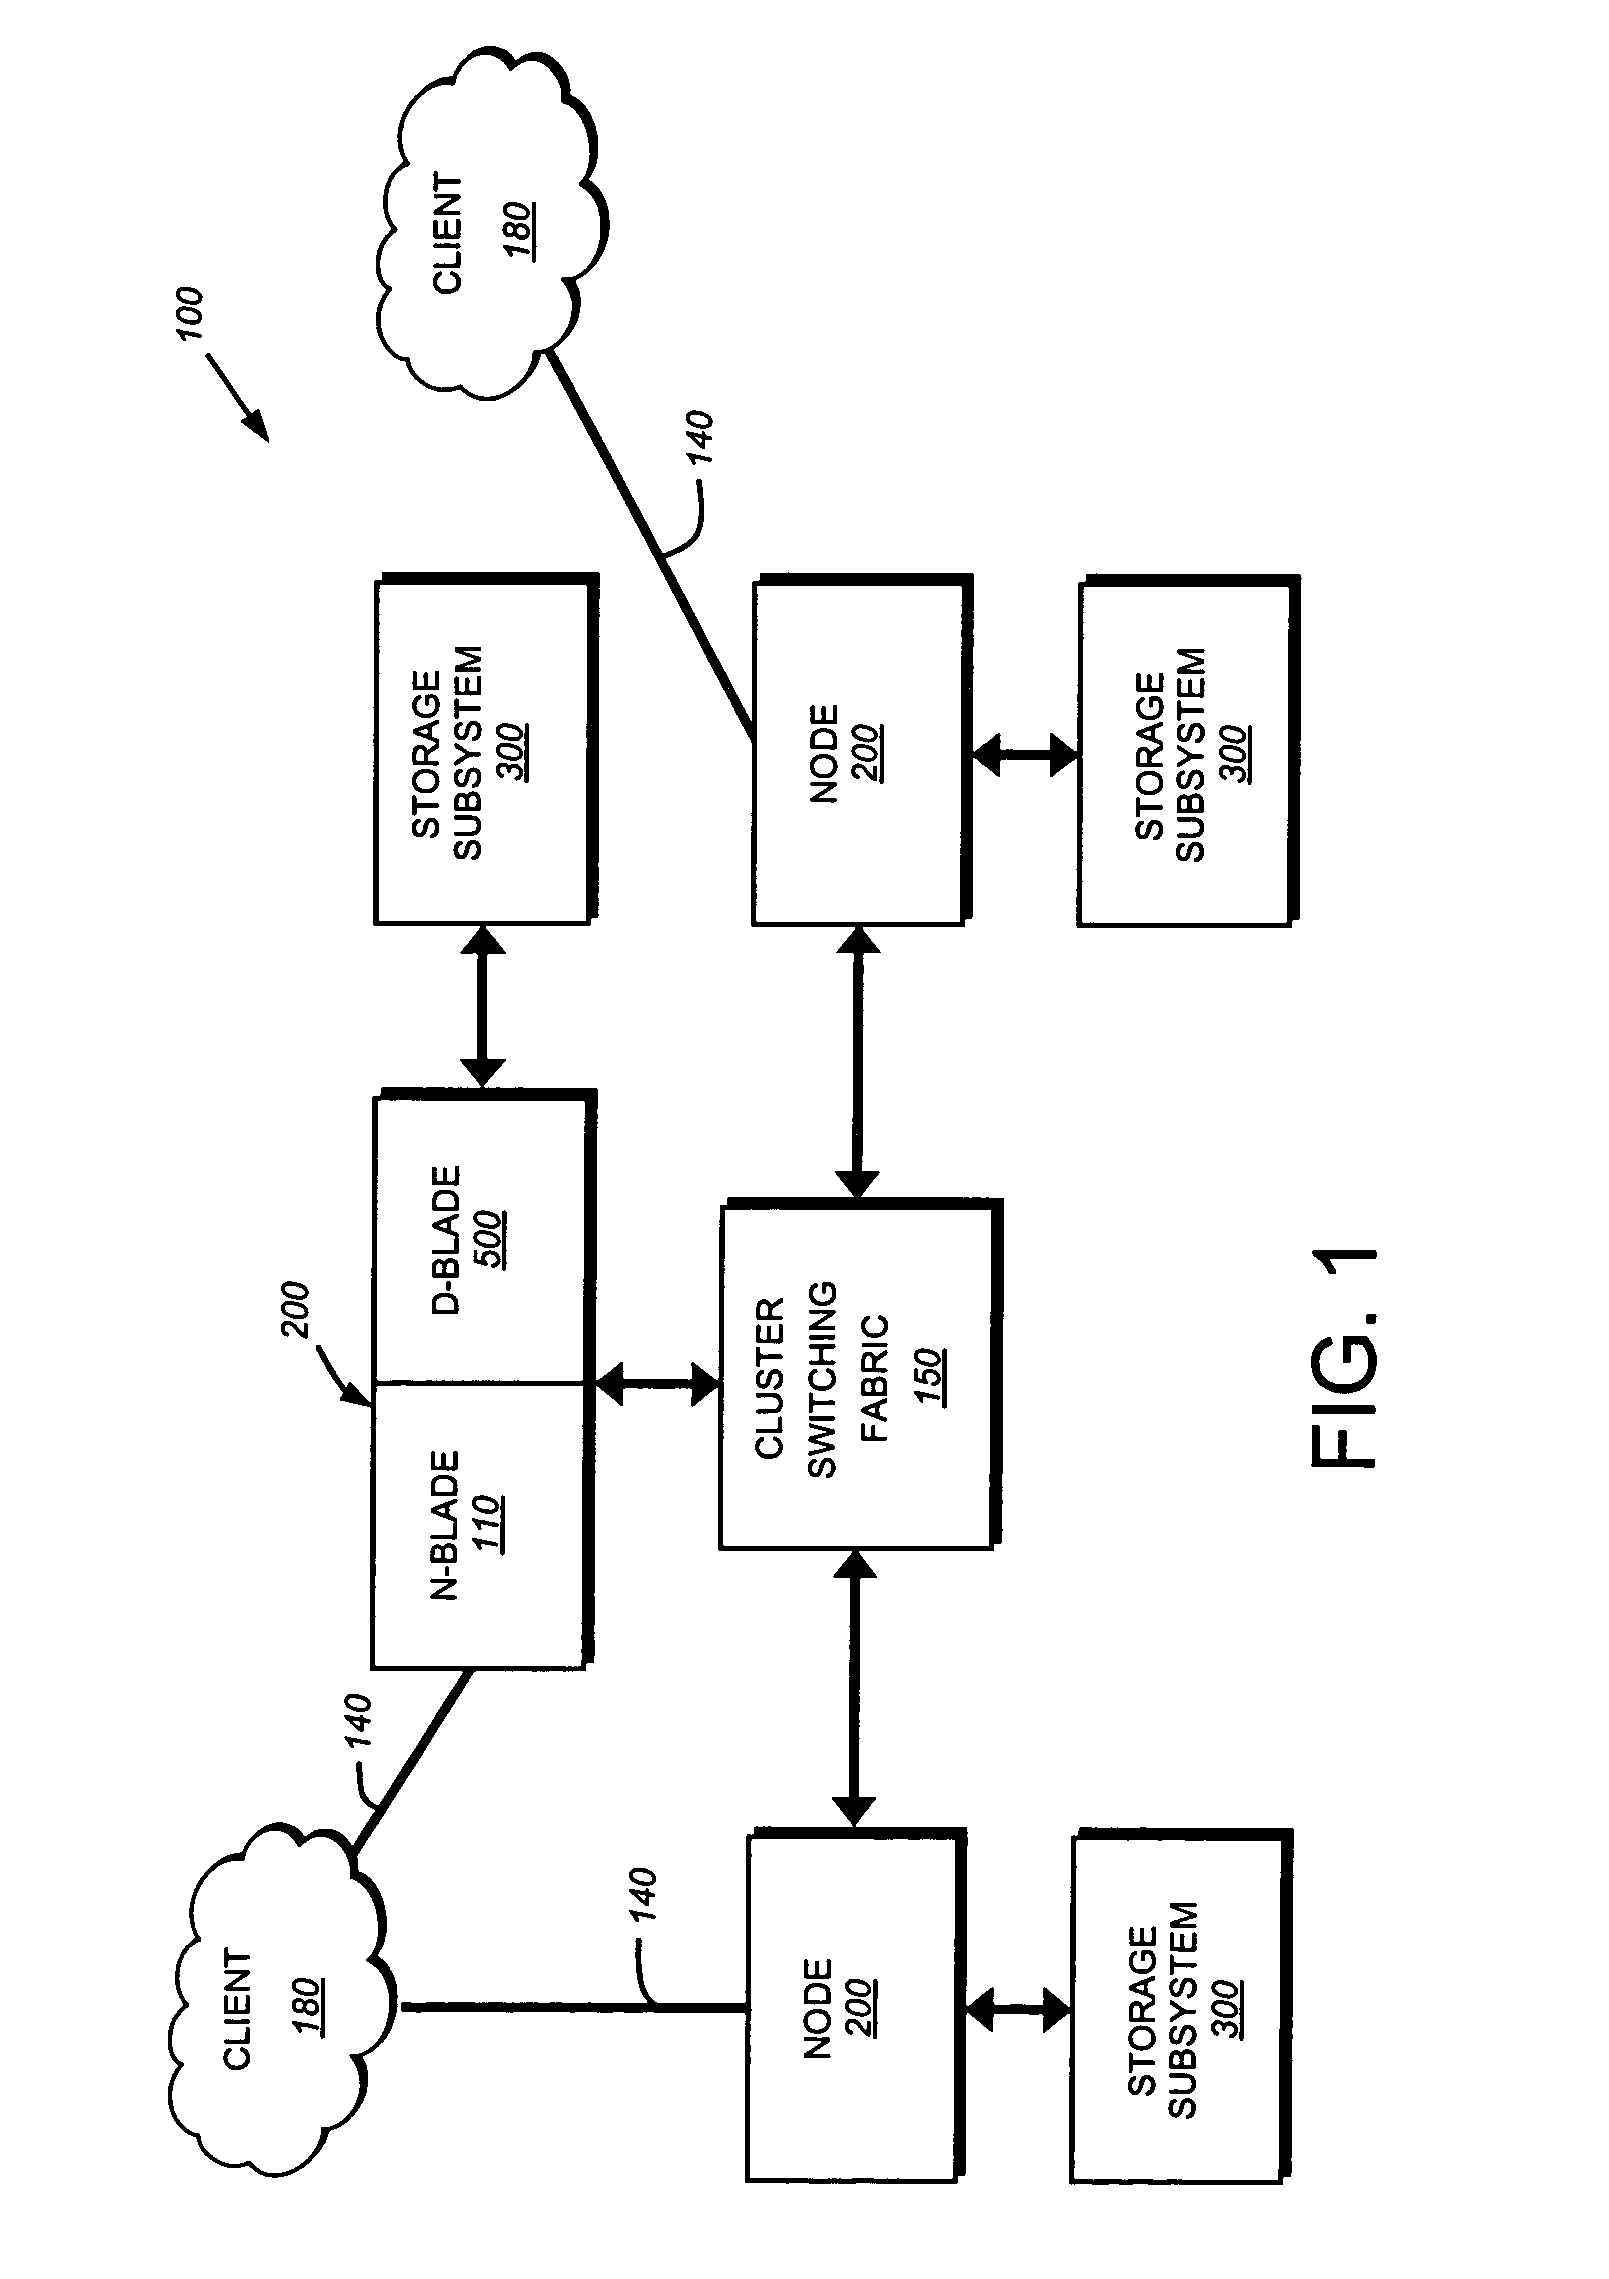 System and method for establishing bi-directional failover in a two node cluster